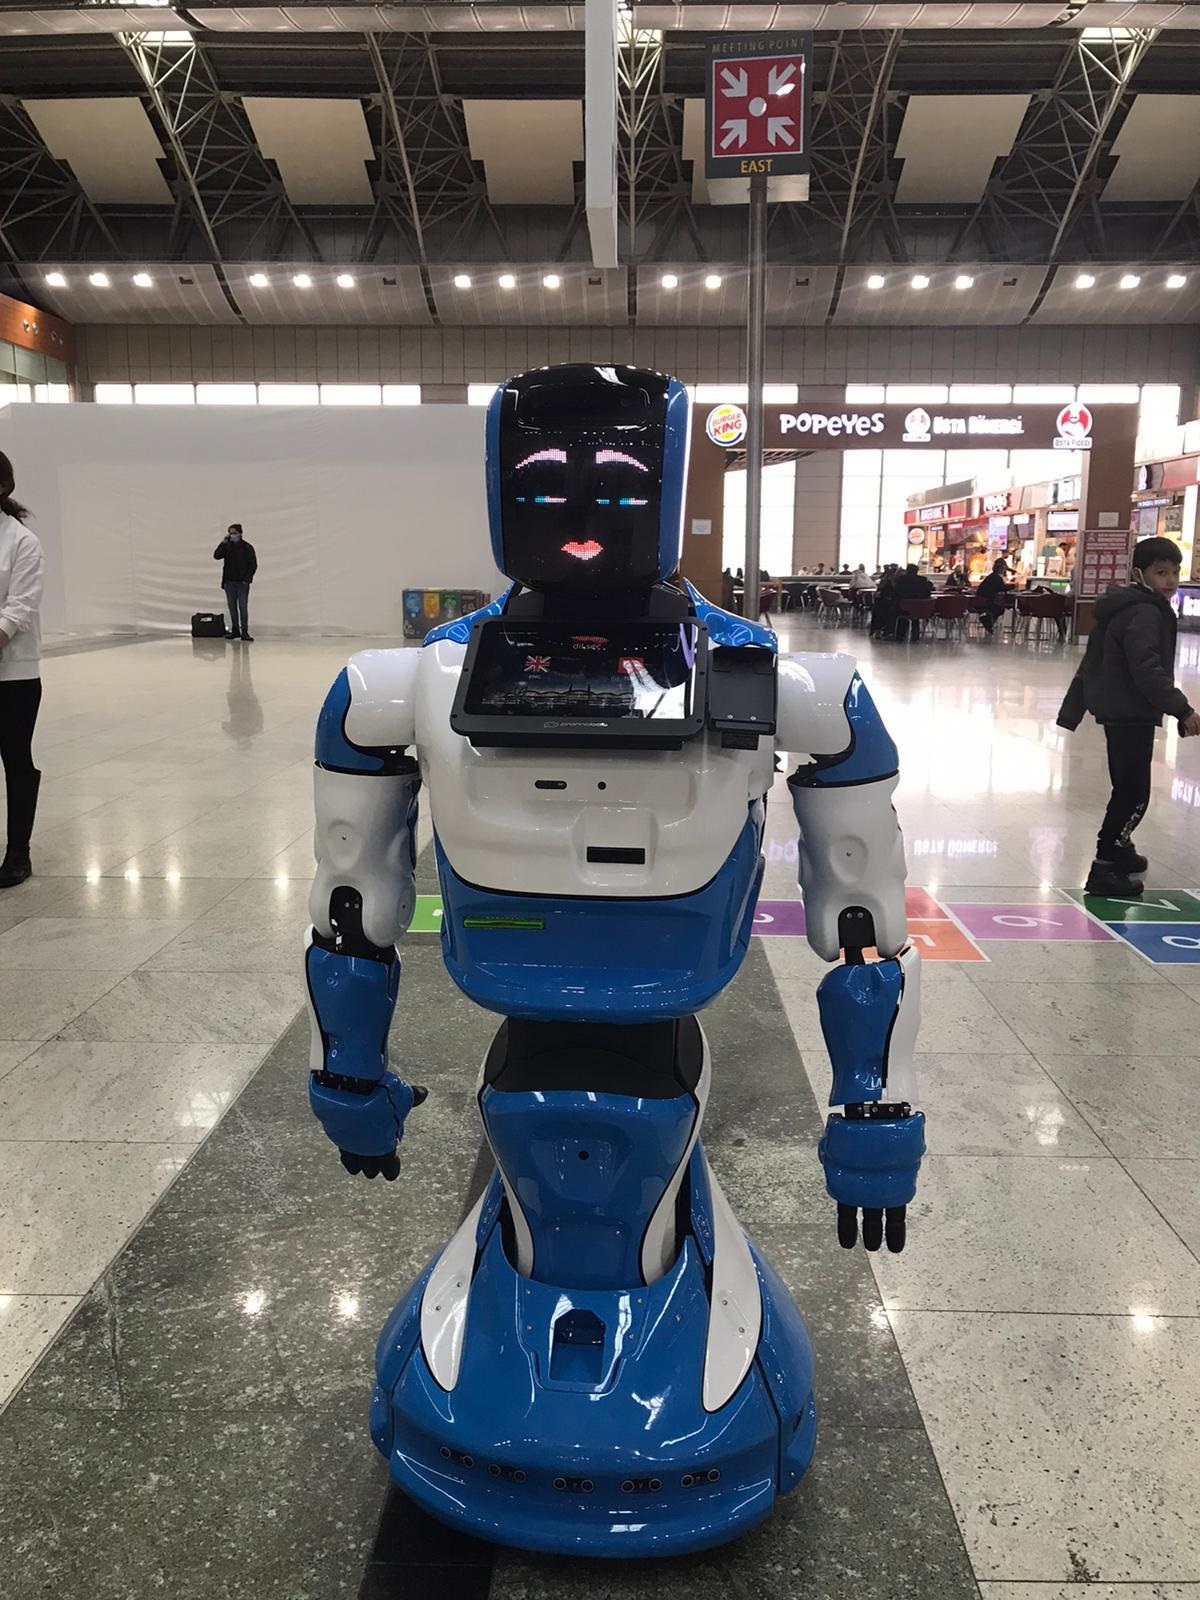 The Aerobot is a mobile robot that assists passengers in wayfinding.